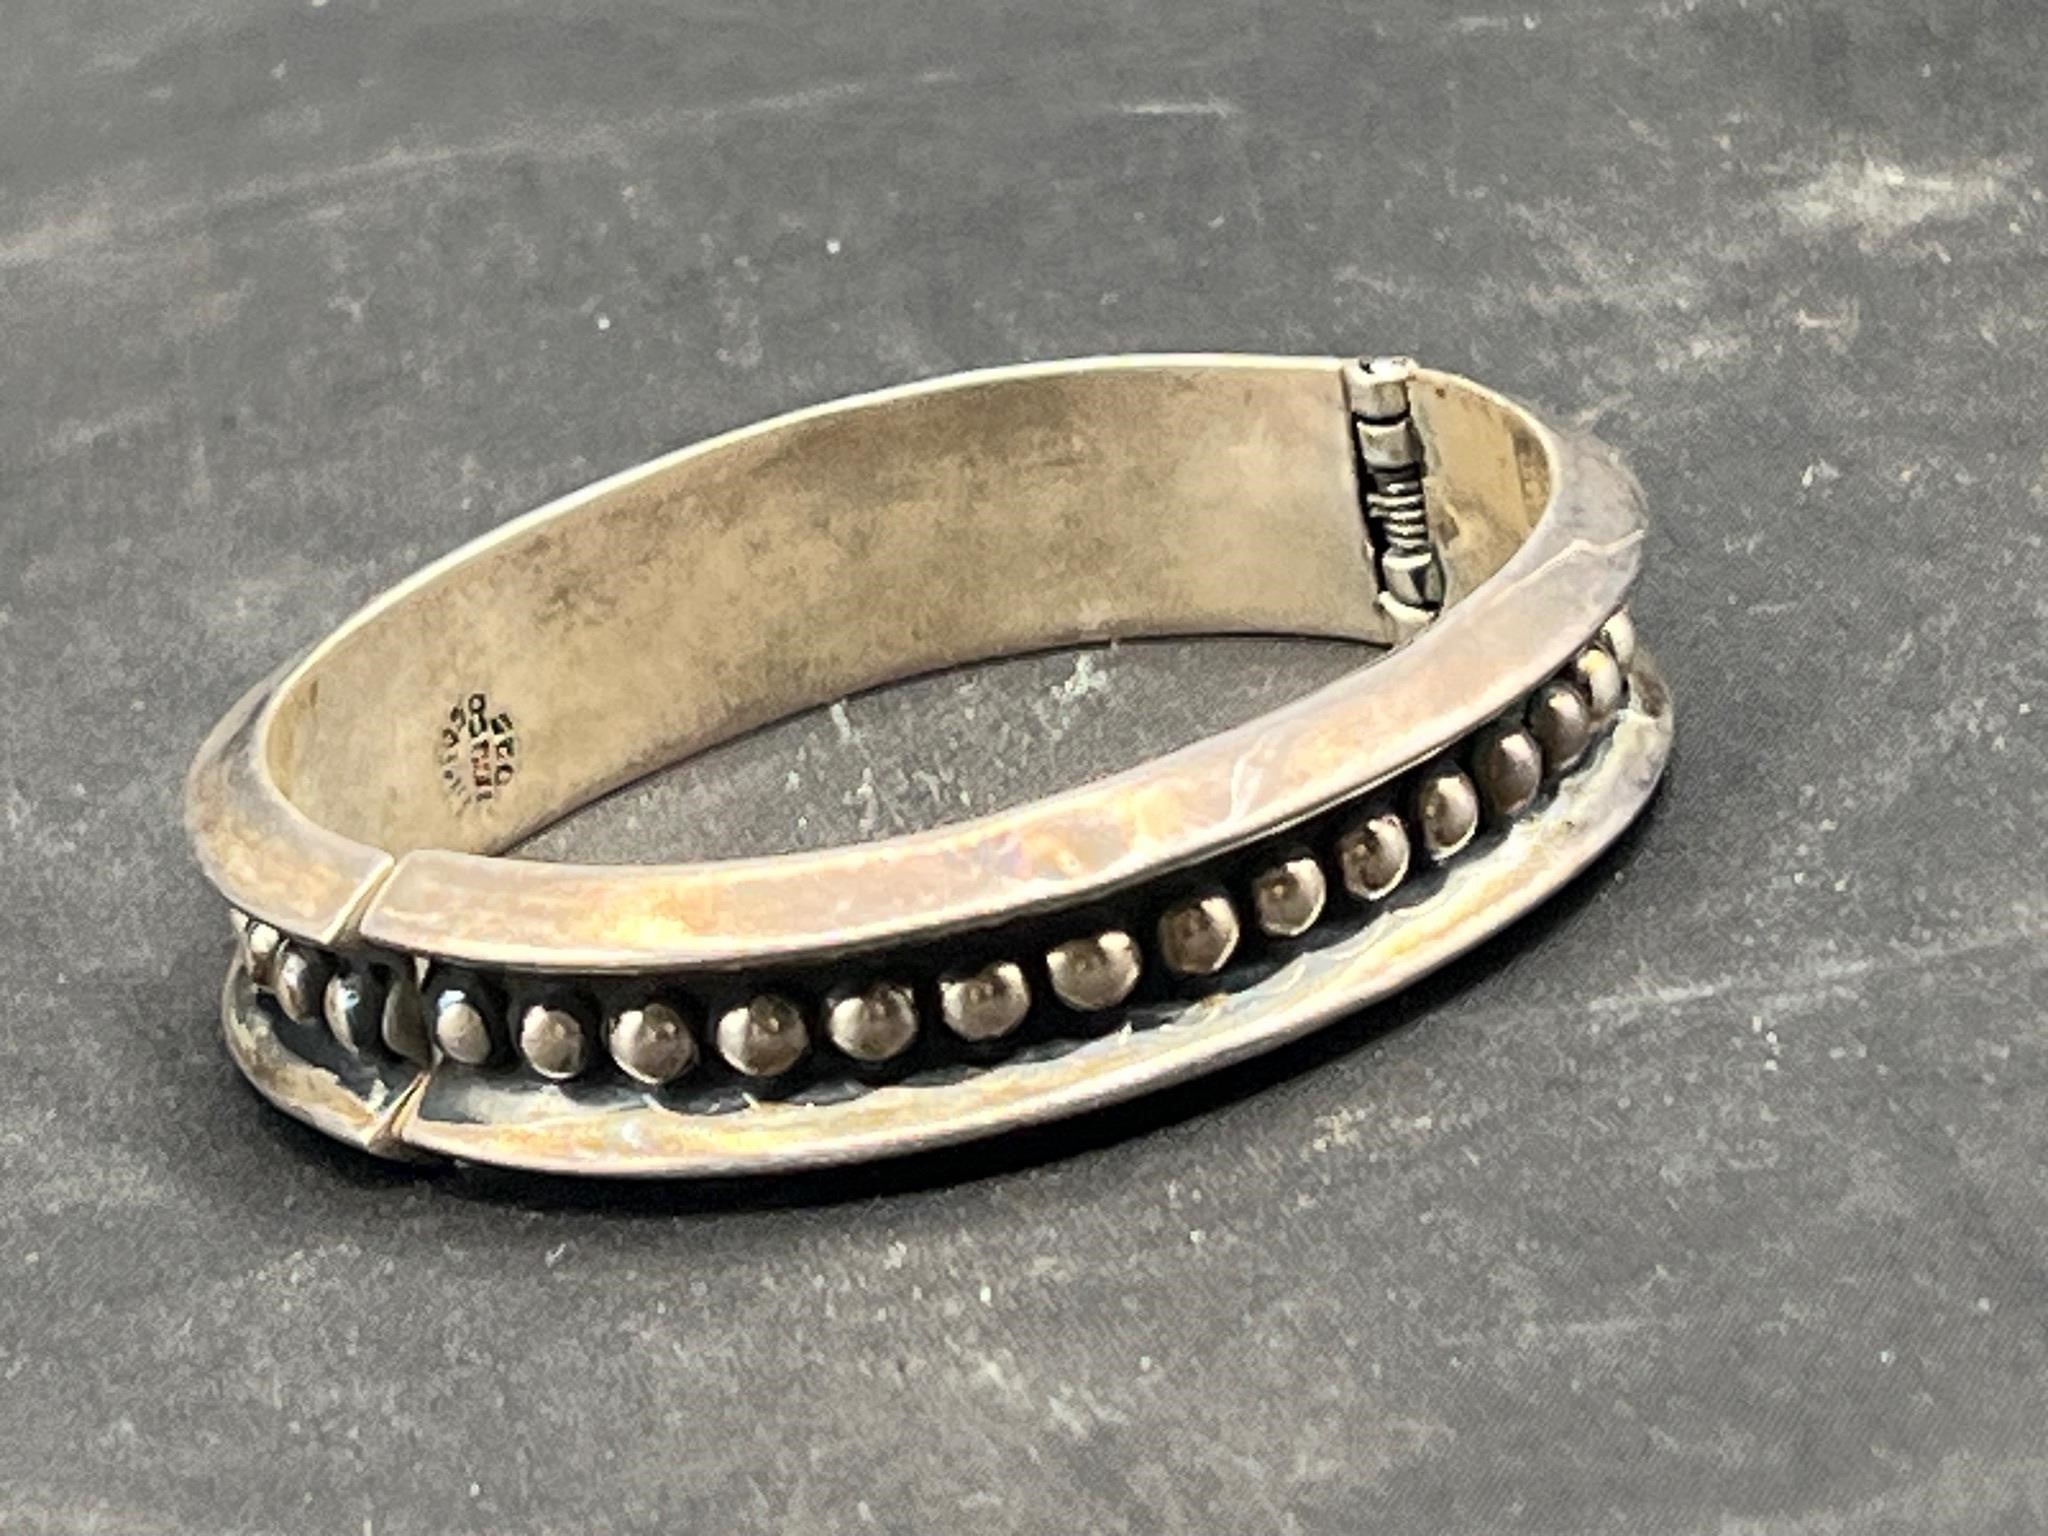 Sterling silver Mexico cuff bracelet